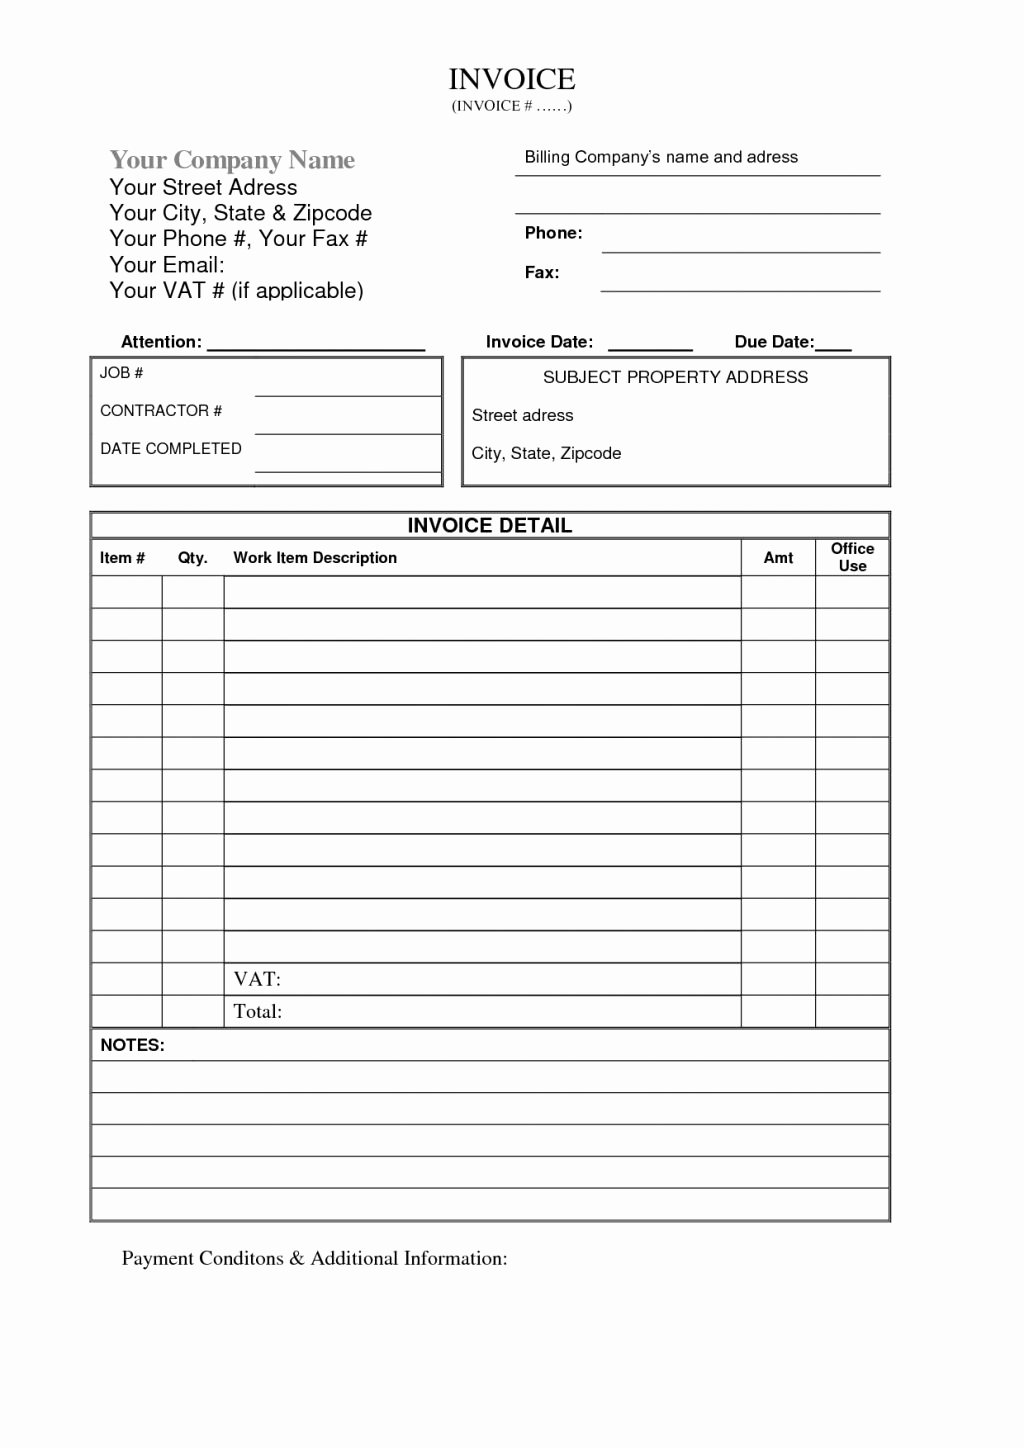 1099 Invoice Template Awesome Lawn Care Payment Plan Colorado Springs Colorado – Best